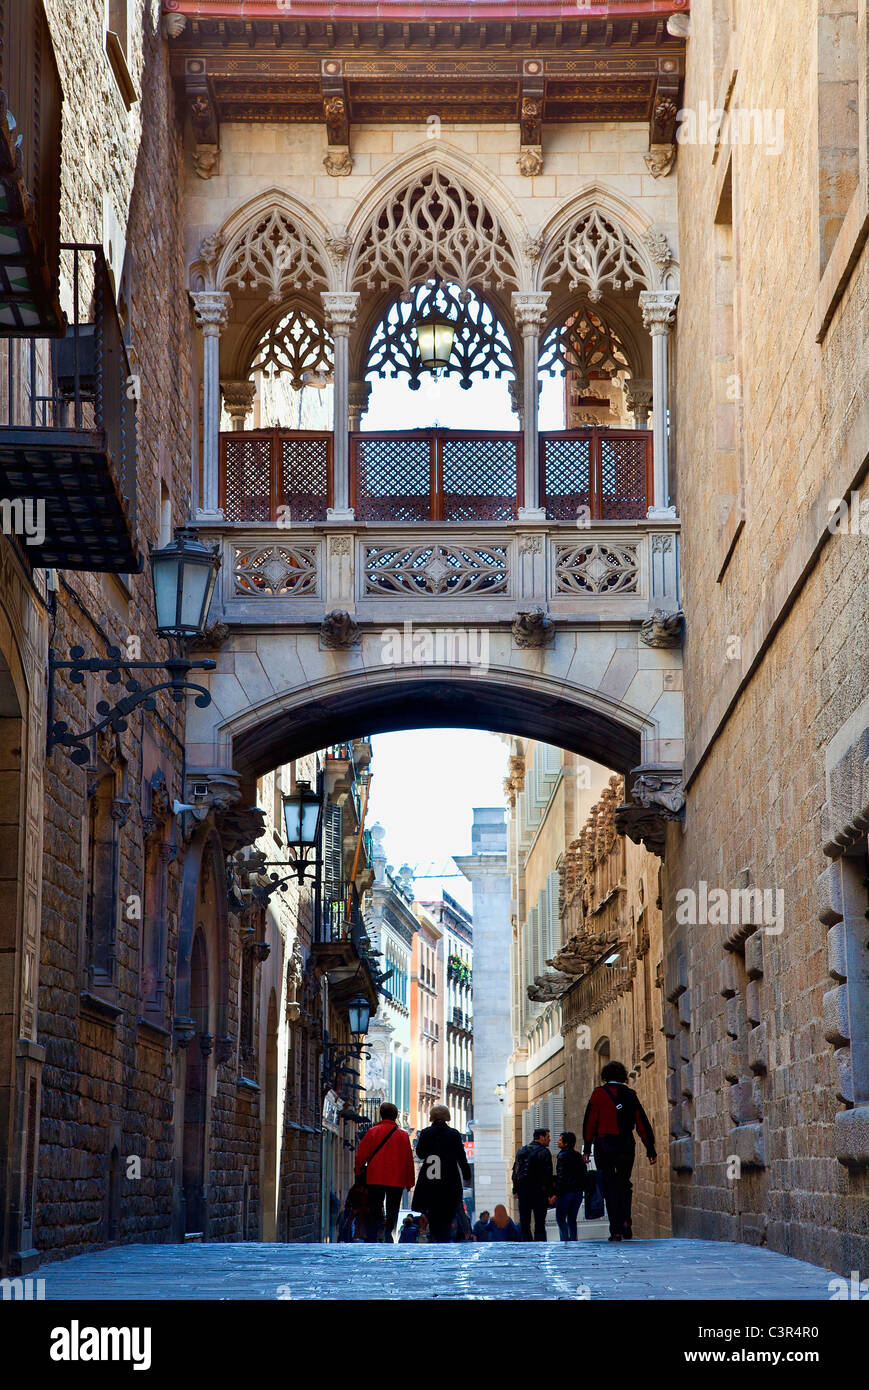 Barcelona, neo-gothic alleyway dating from 1928 Stock Photo